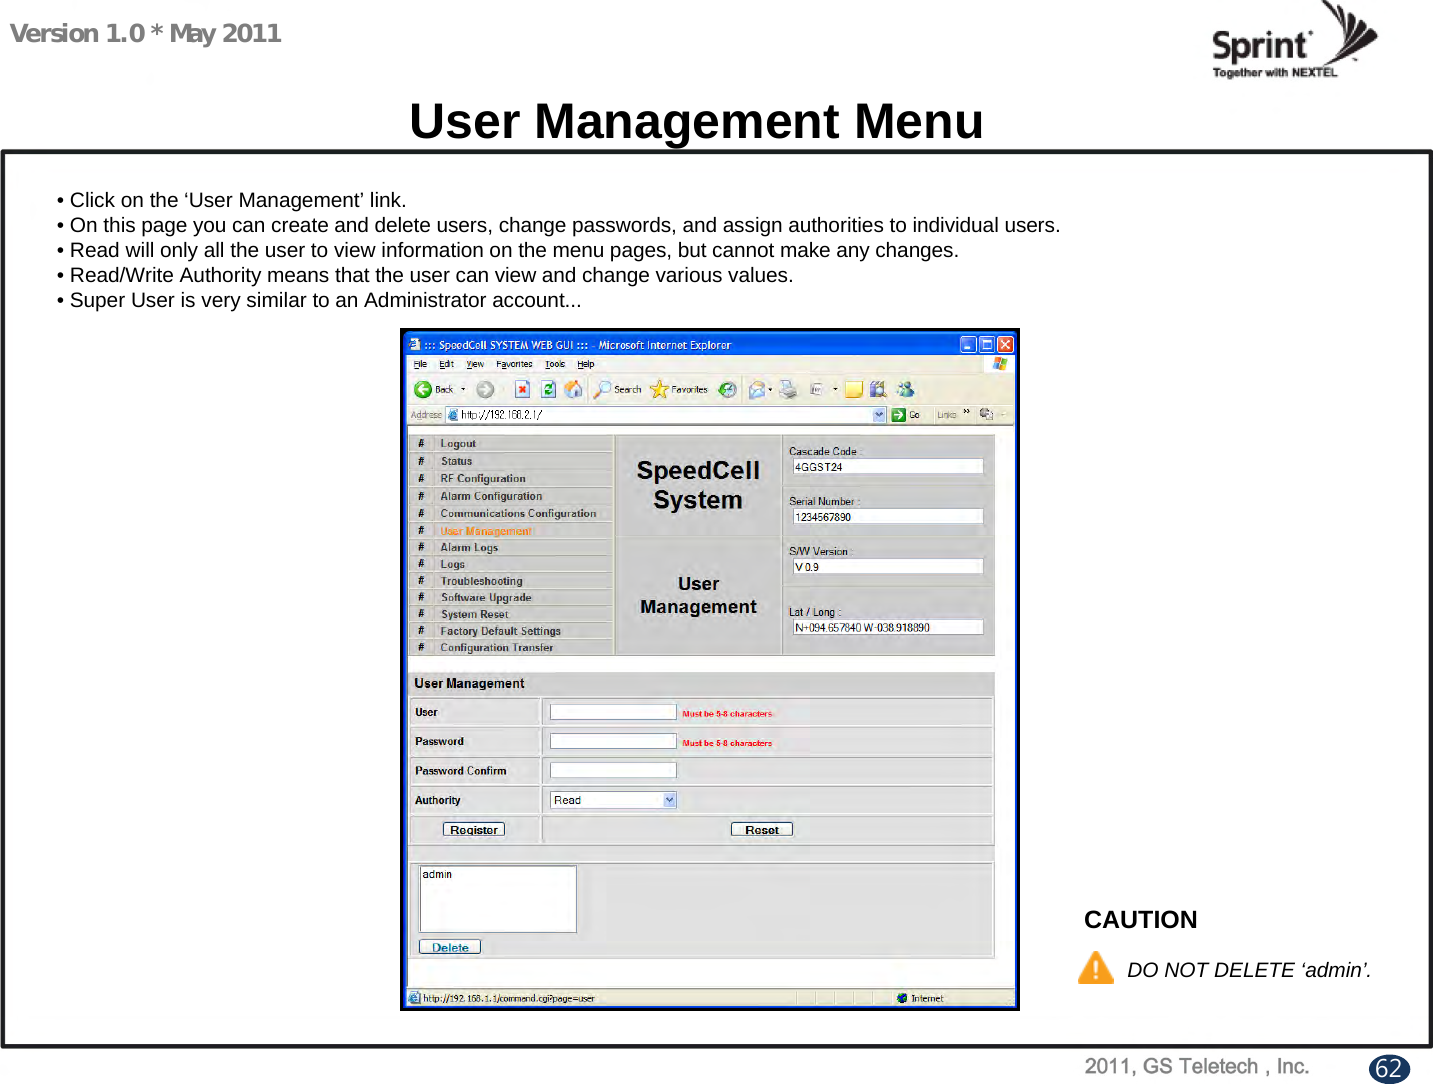 Version 1.0 * May 2011User Management MenuCAUTIONDO NOT DELETE ‘admin’.• Click on the ‘User Management’ link.• On this page you can create and delete users, change passwords, and assign authorities to individual users.• Read will only all the user to view information on the menu pages, but cannot make any changes.• Read/Write Authority means that the user can view and change various values.• Super User is very similar to an Administrator account...62